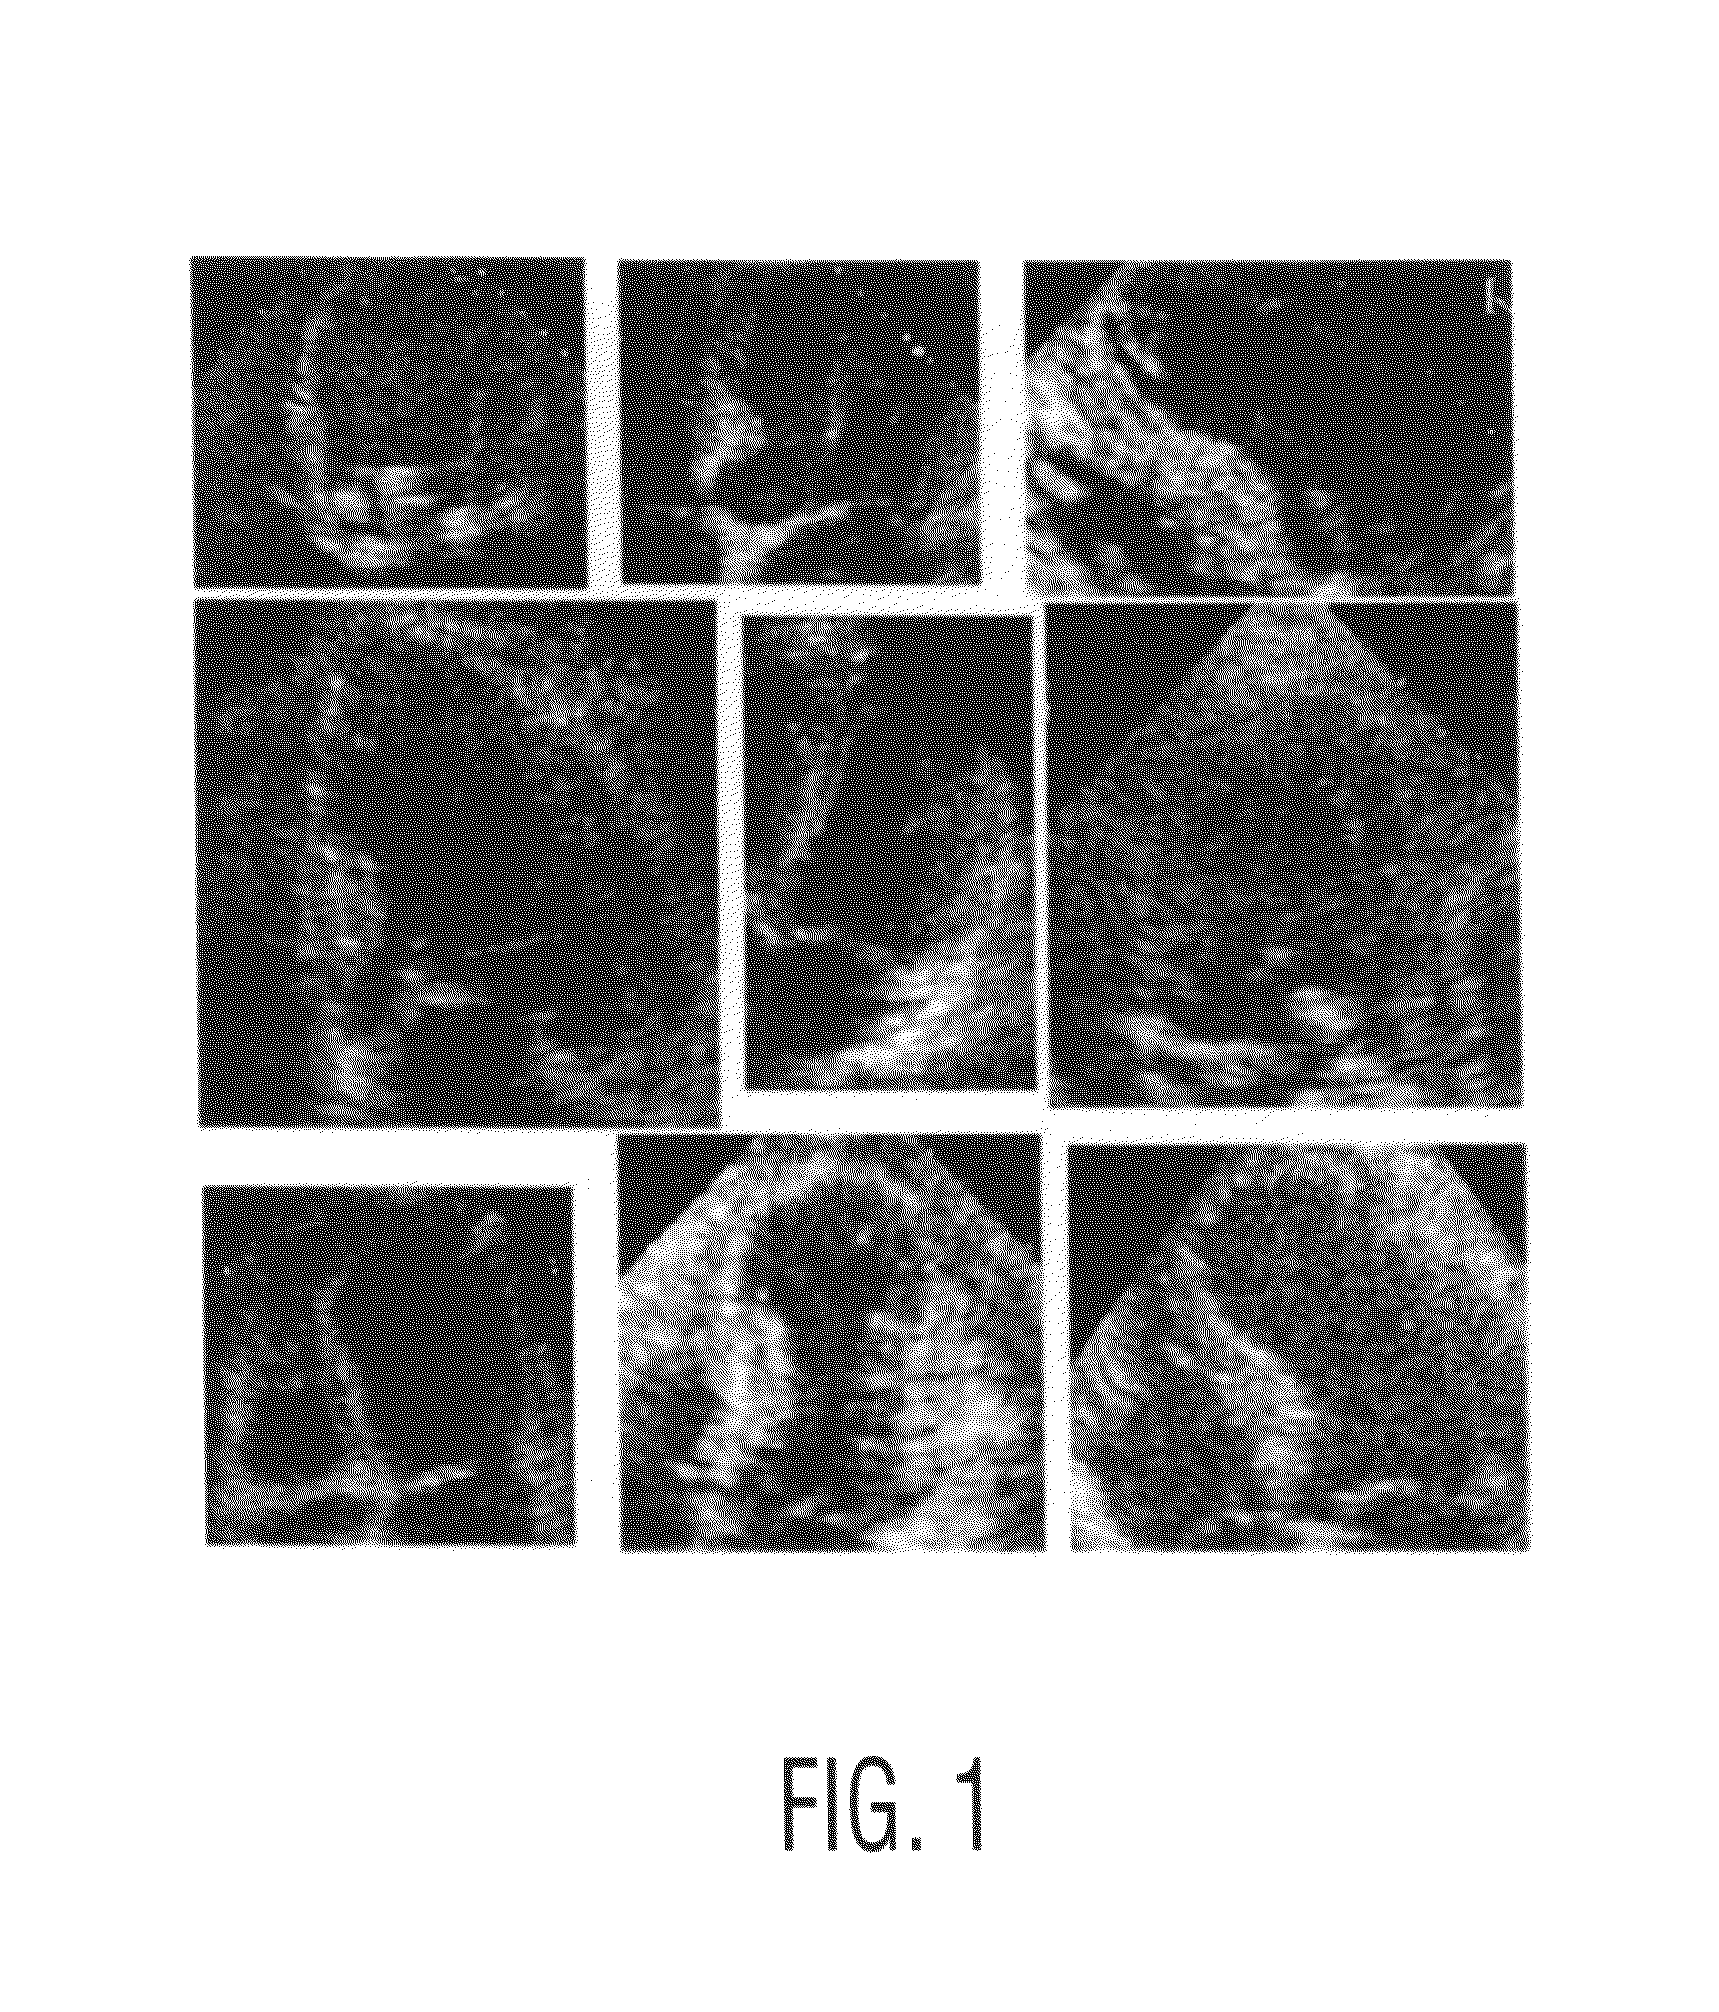 Method of database-guided segmentation of anatomical structures having complex appearances